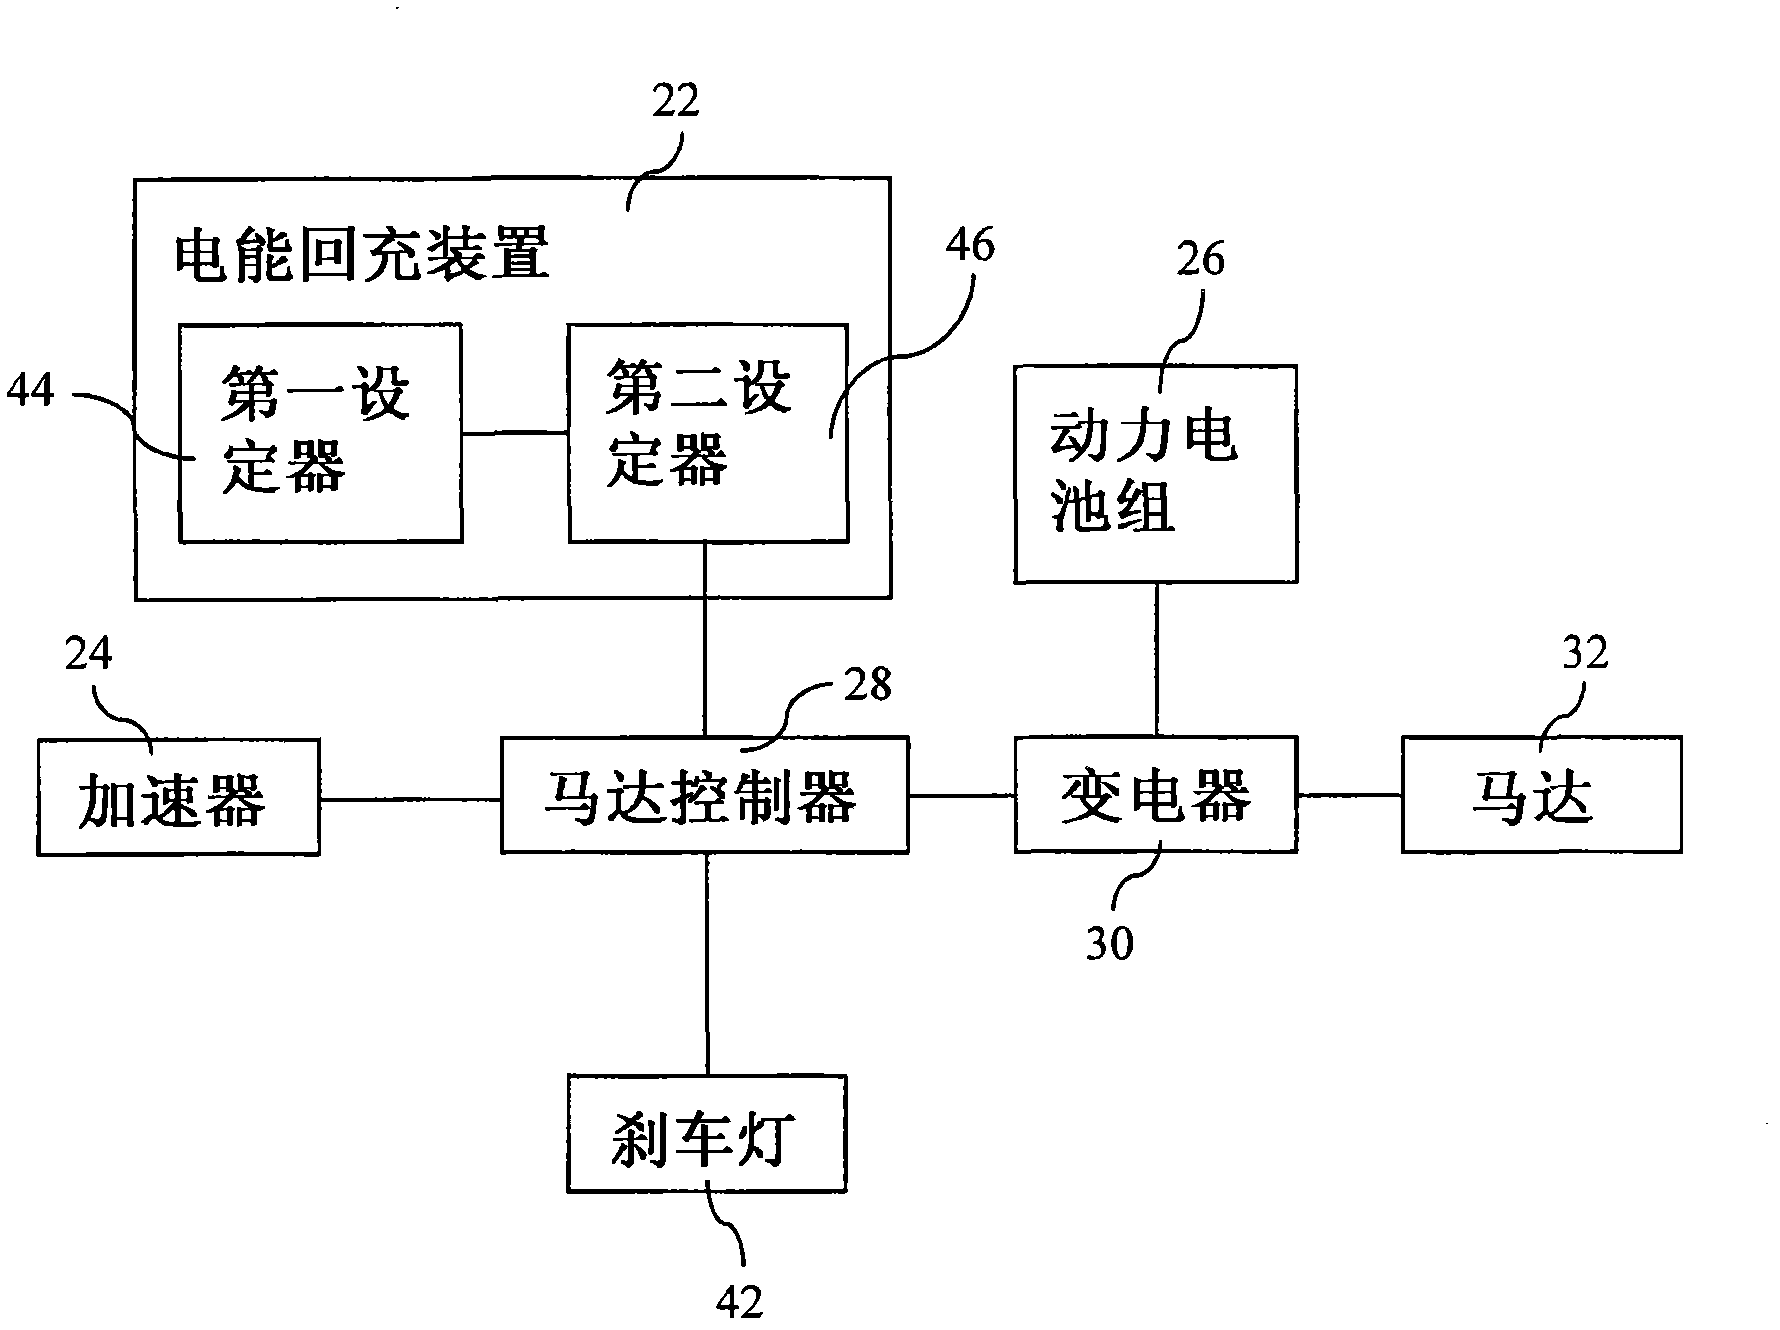 Electric energy recharging operating device, electric energy recharging operating circuit and electric energy recharging control method of electrocar